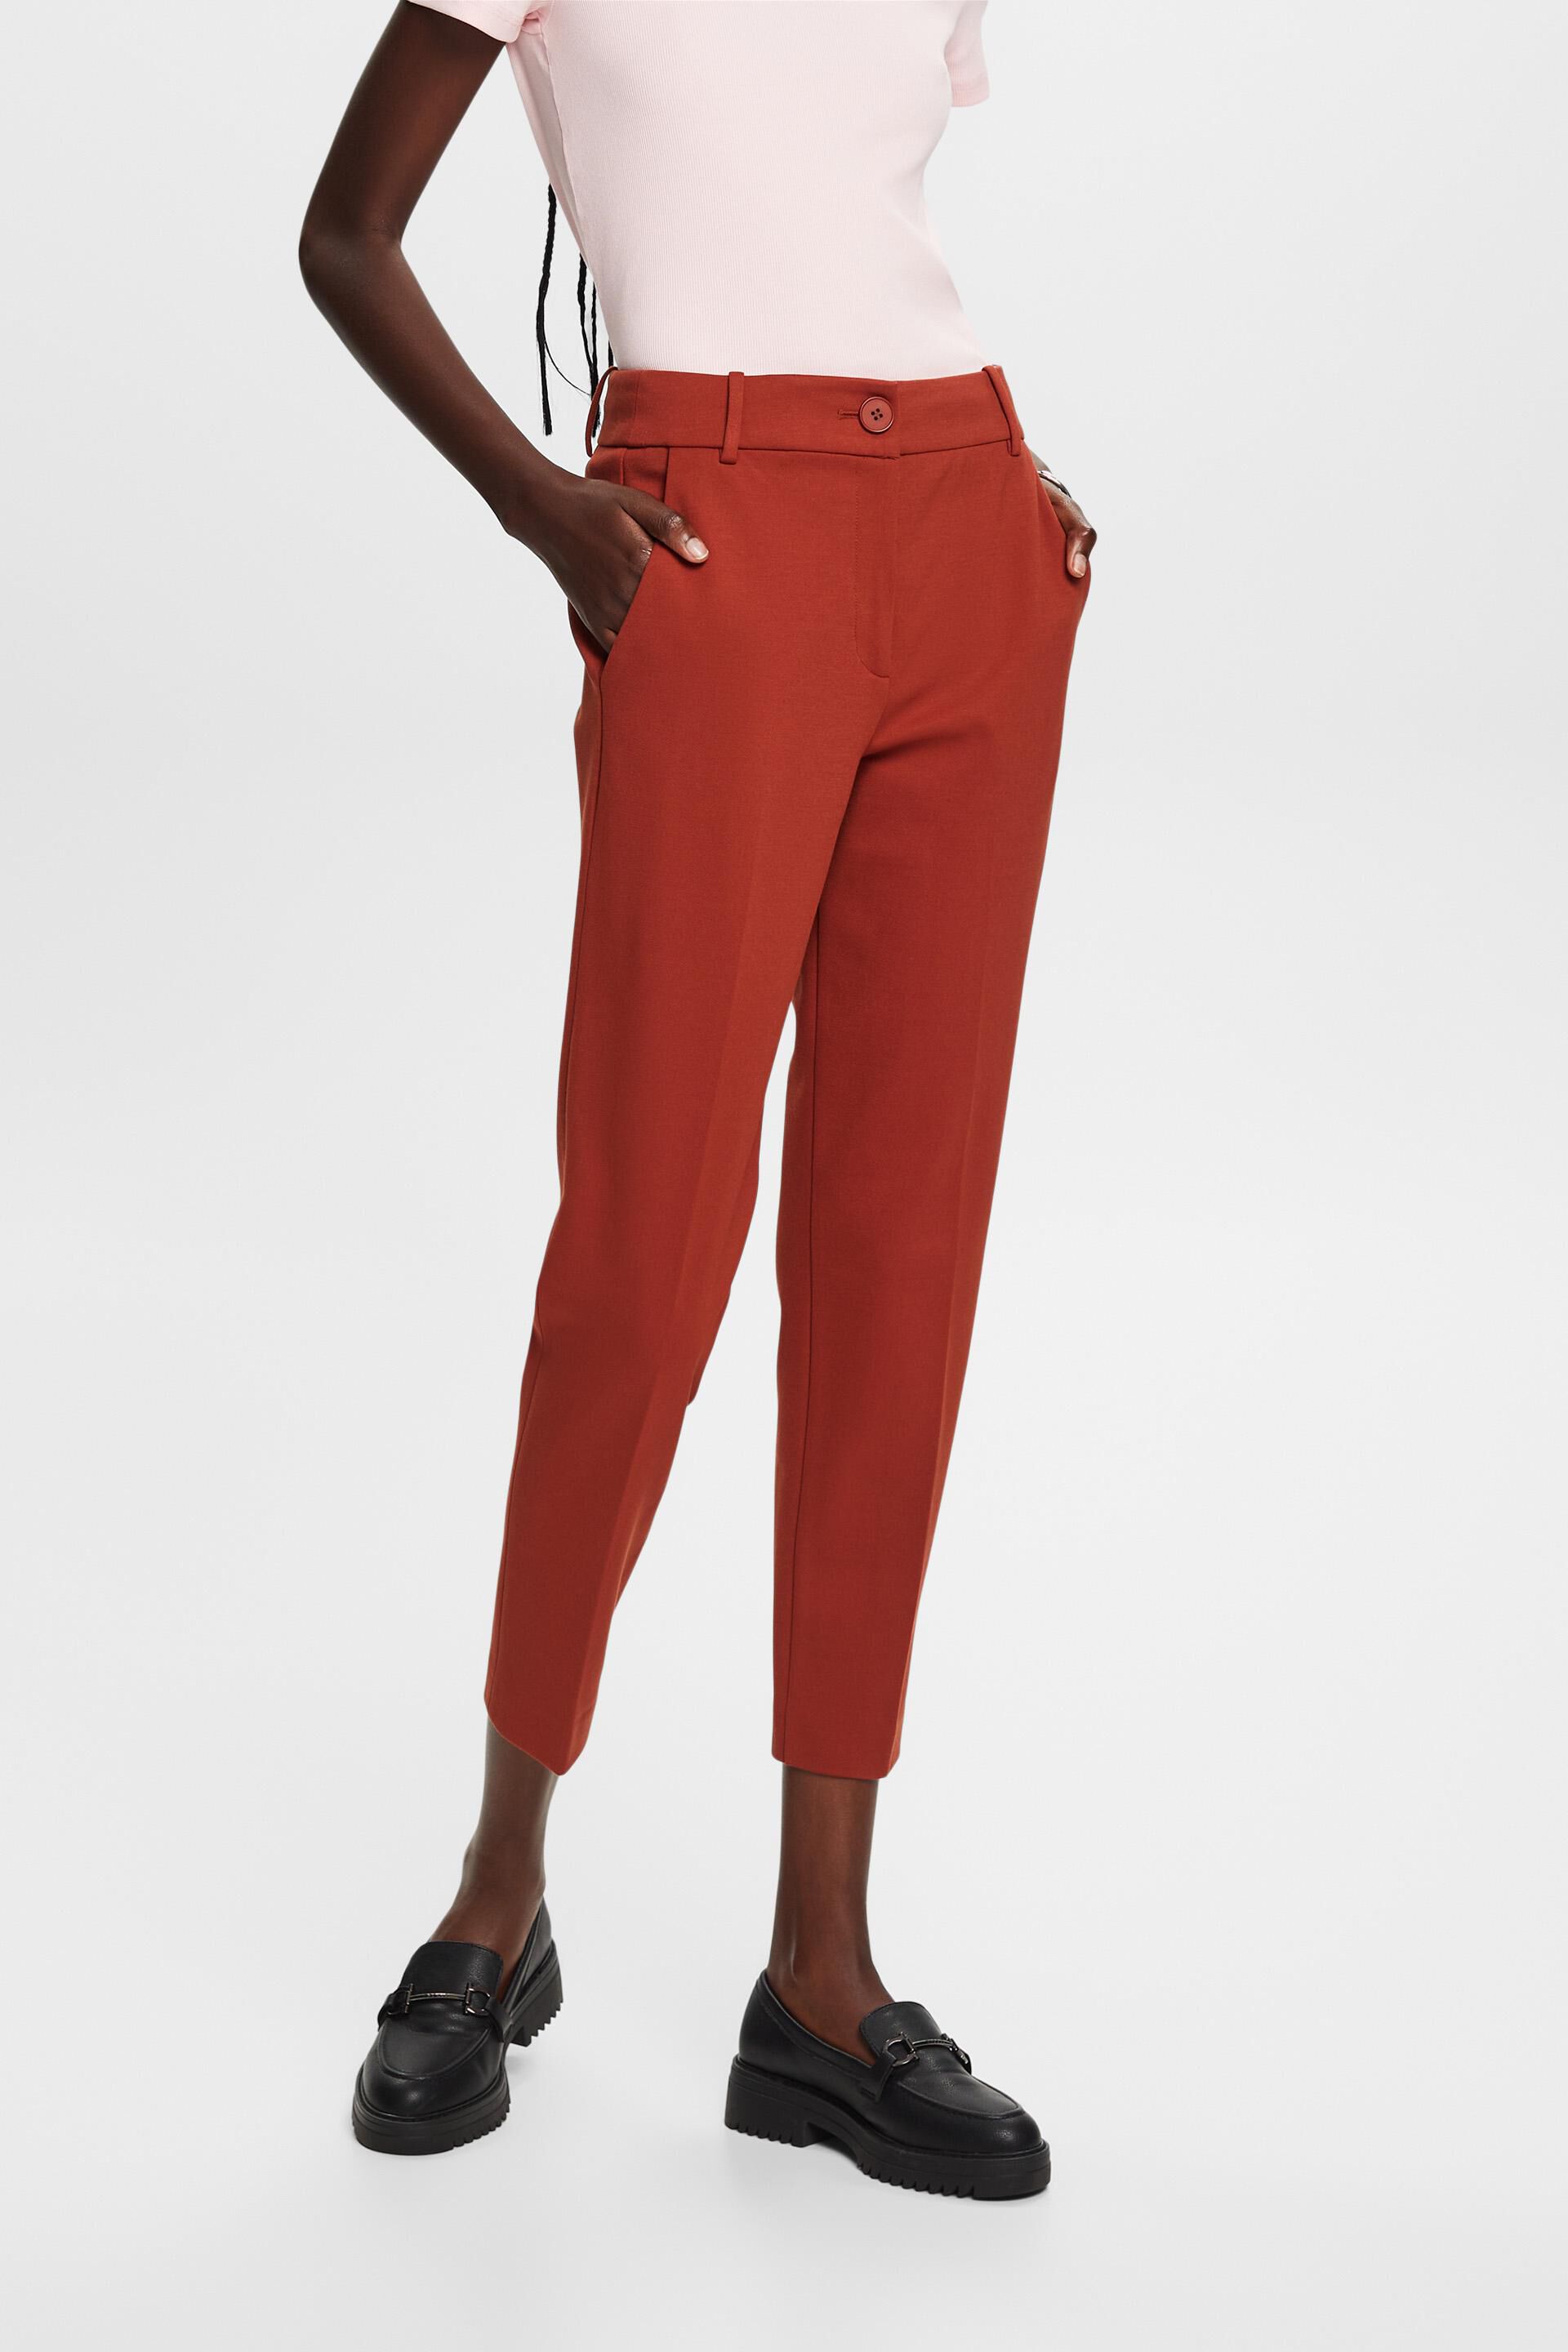 Esprit Punto cropped jersey trousers